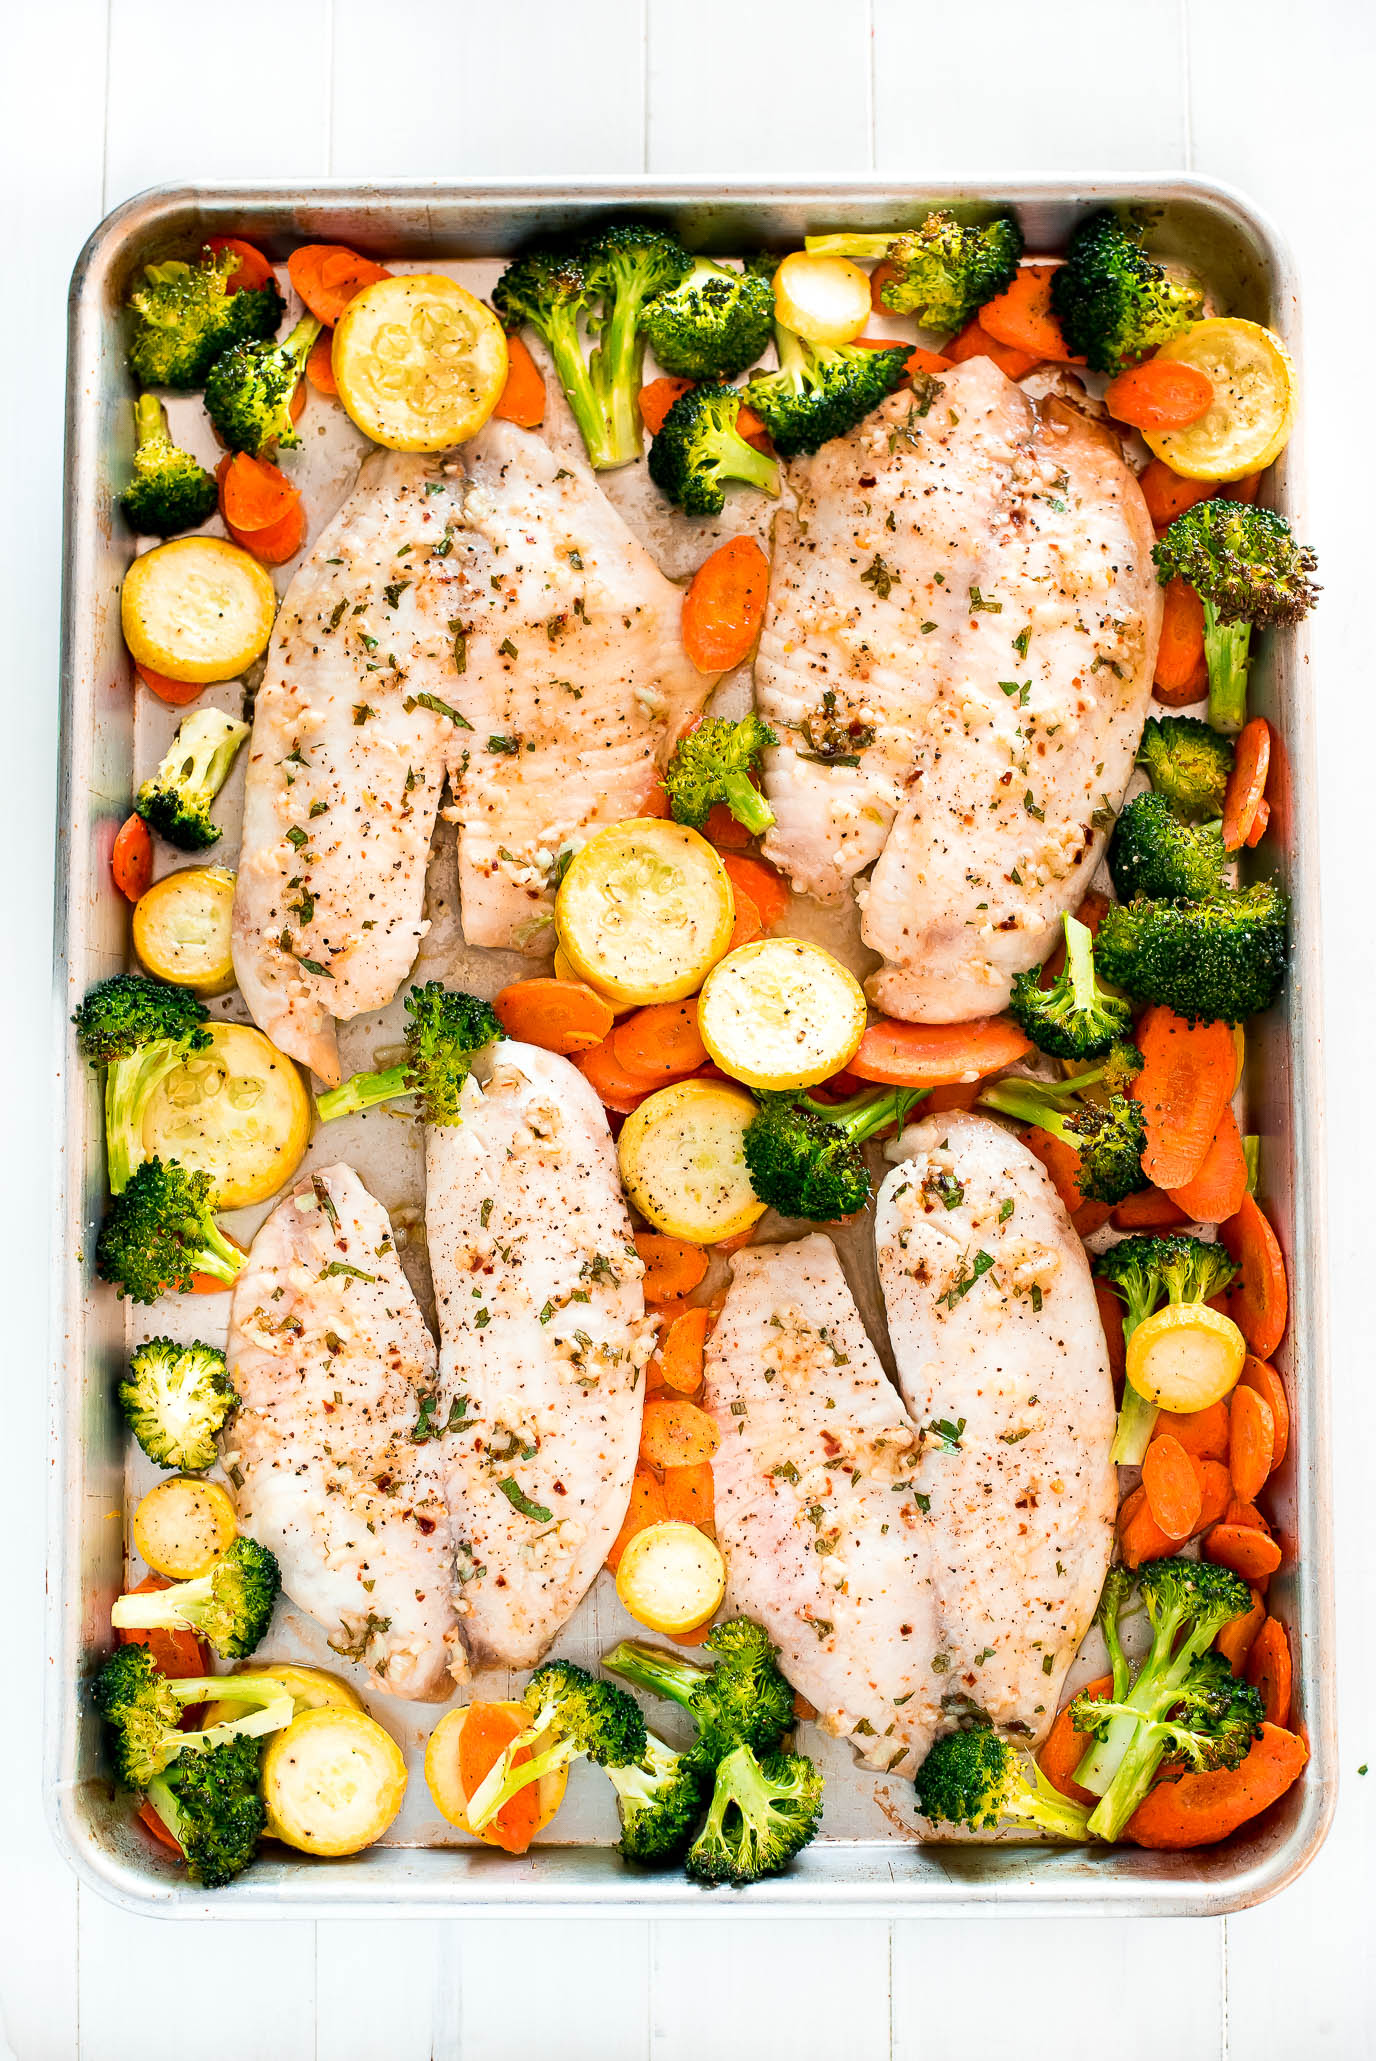 Baked Tilapia and Roasted Veggies | The Recipe Critic